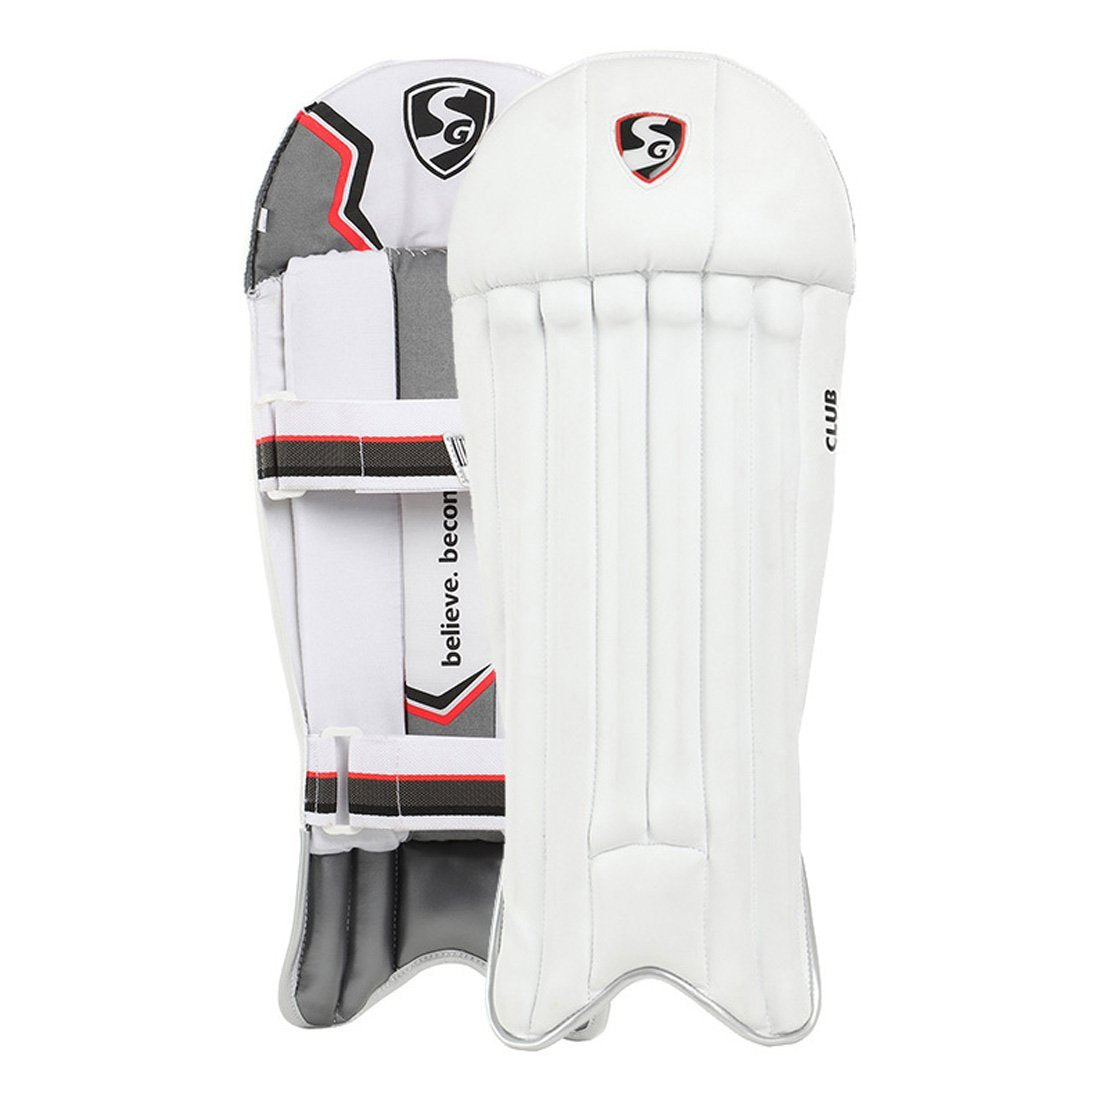 SG Club Junior / Youth Cricket Wicket Keeping Pads